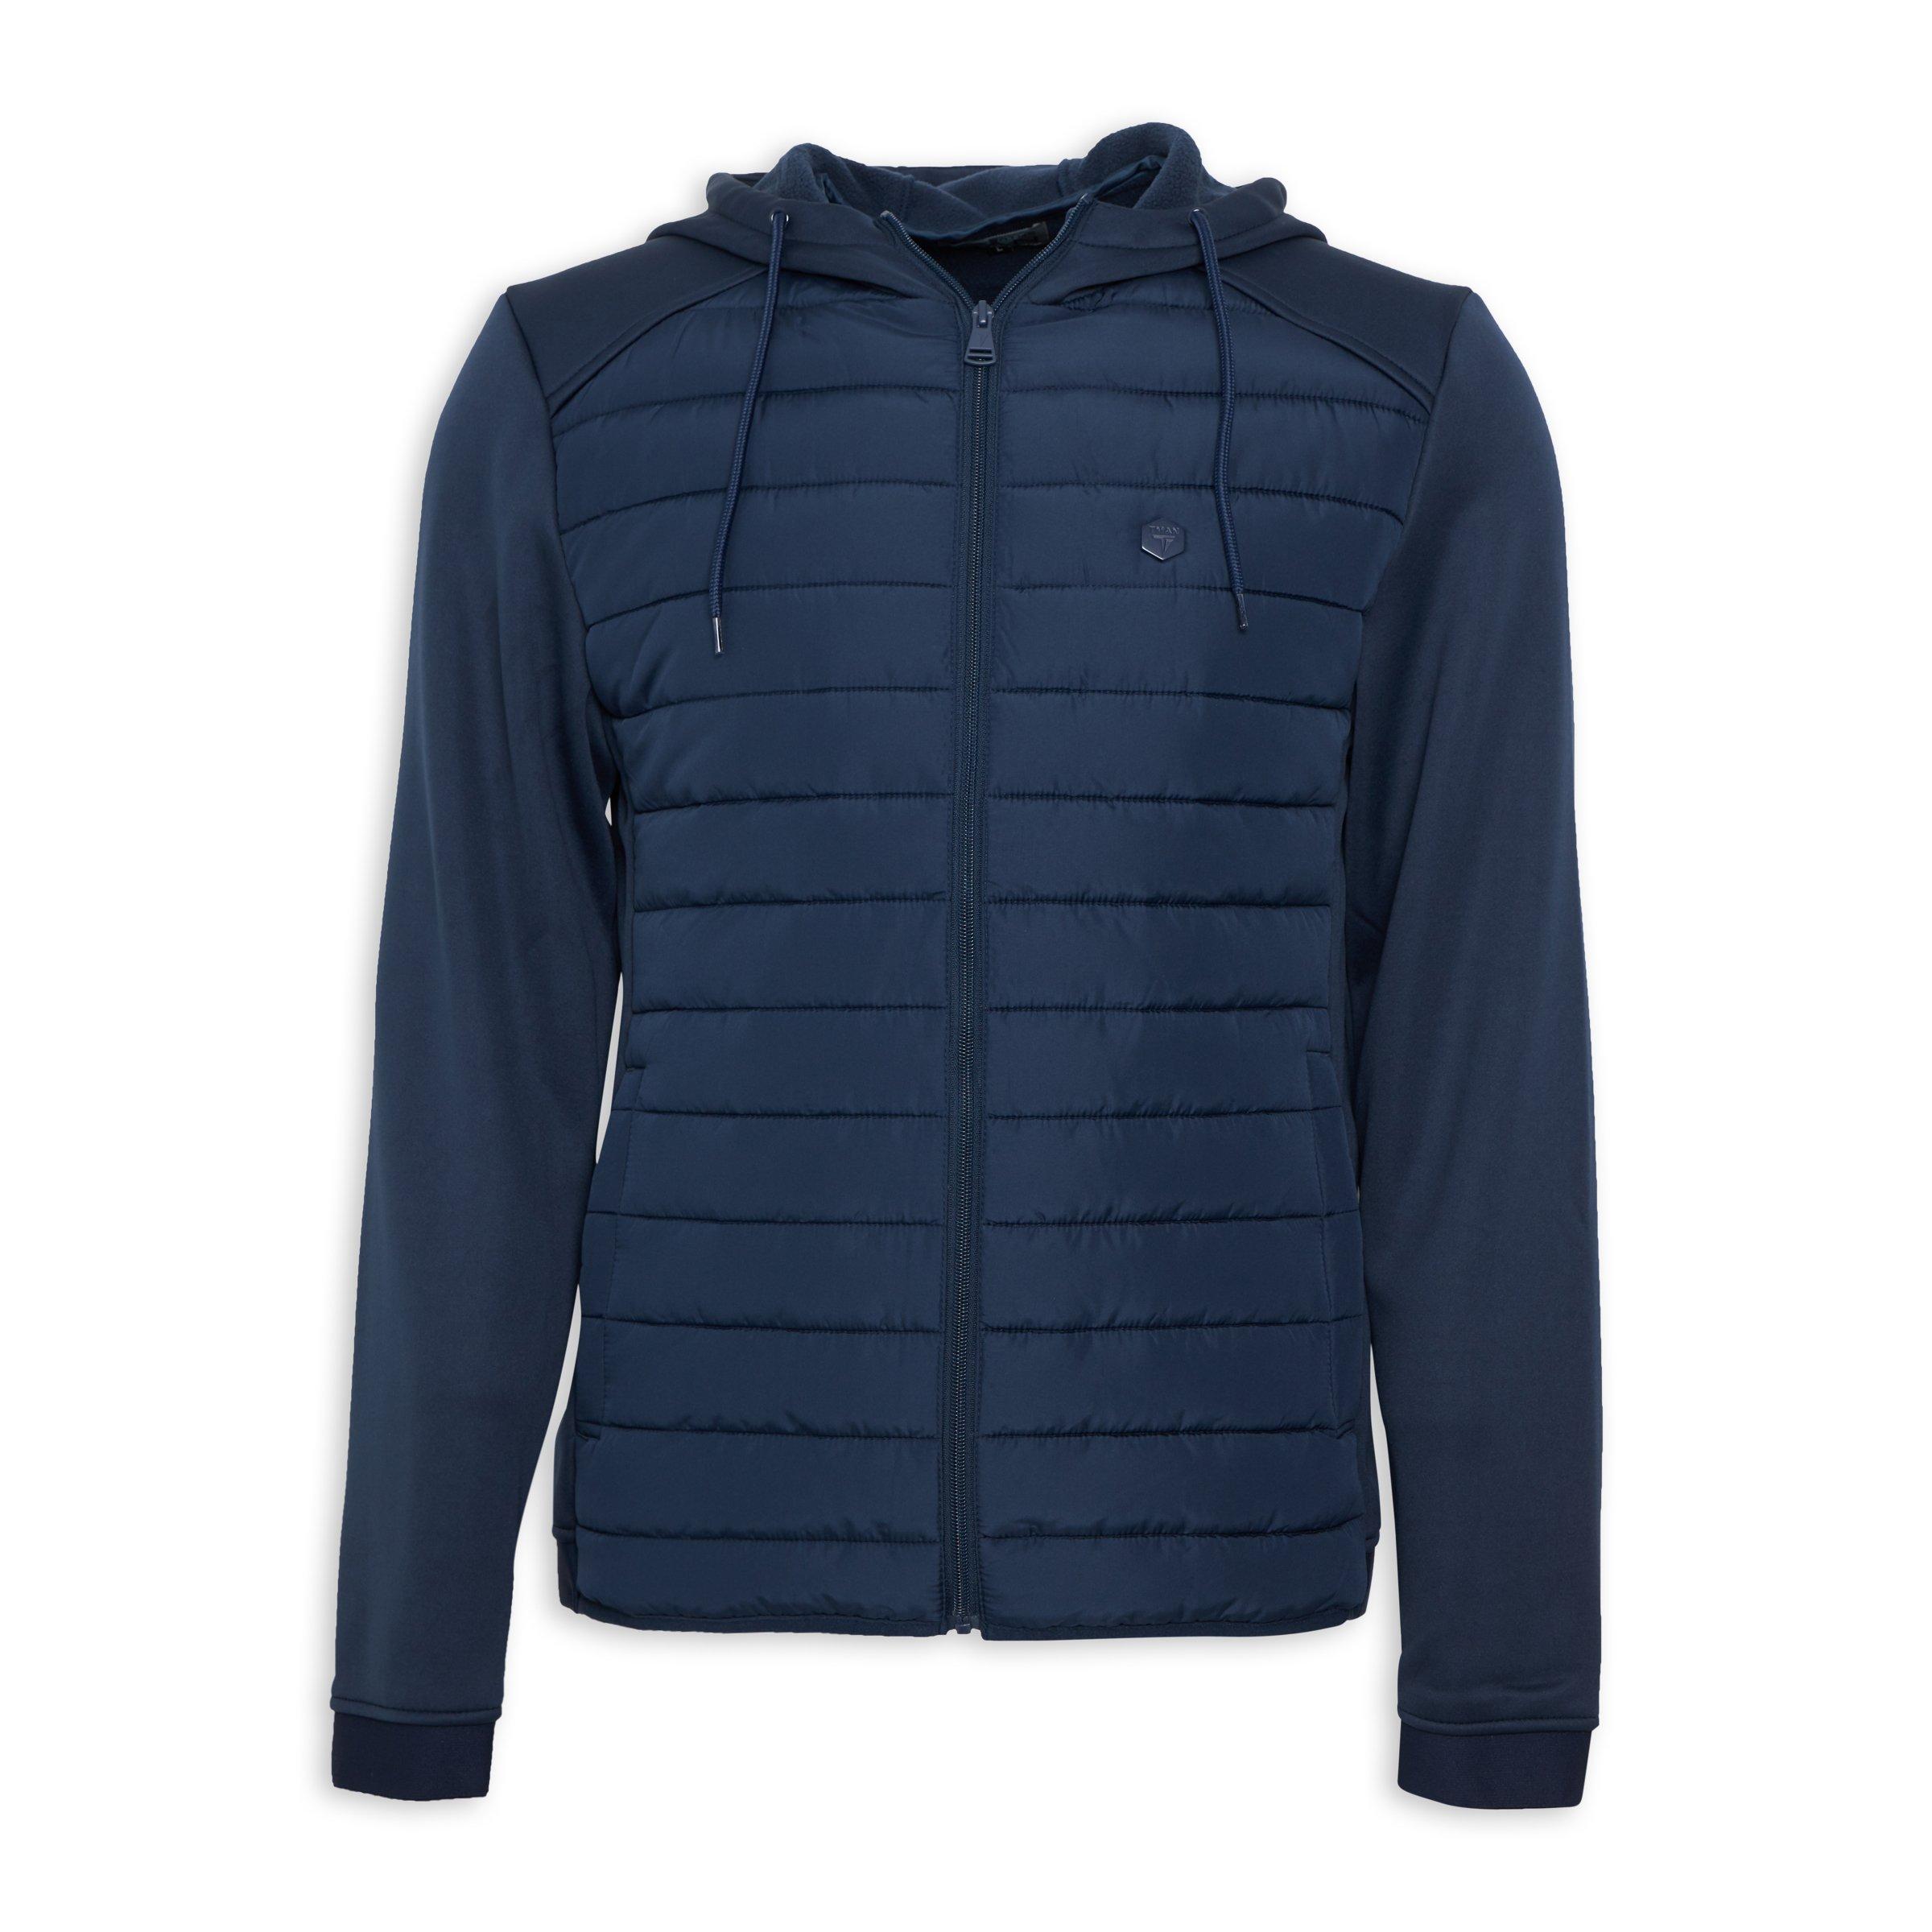 truworths man winter jackets for Sale,Up To OFF 77%